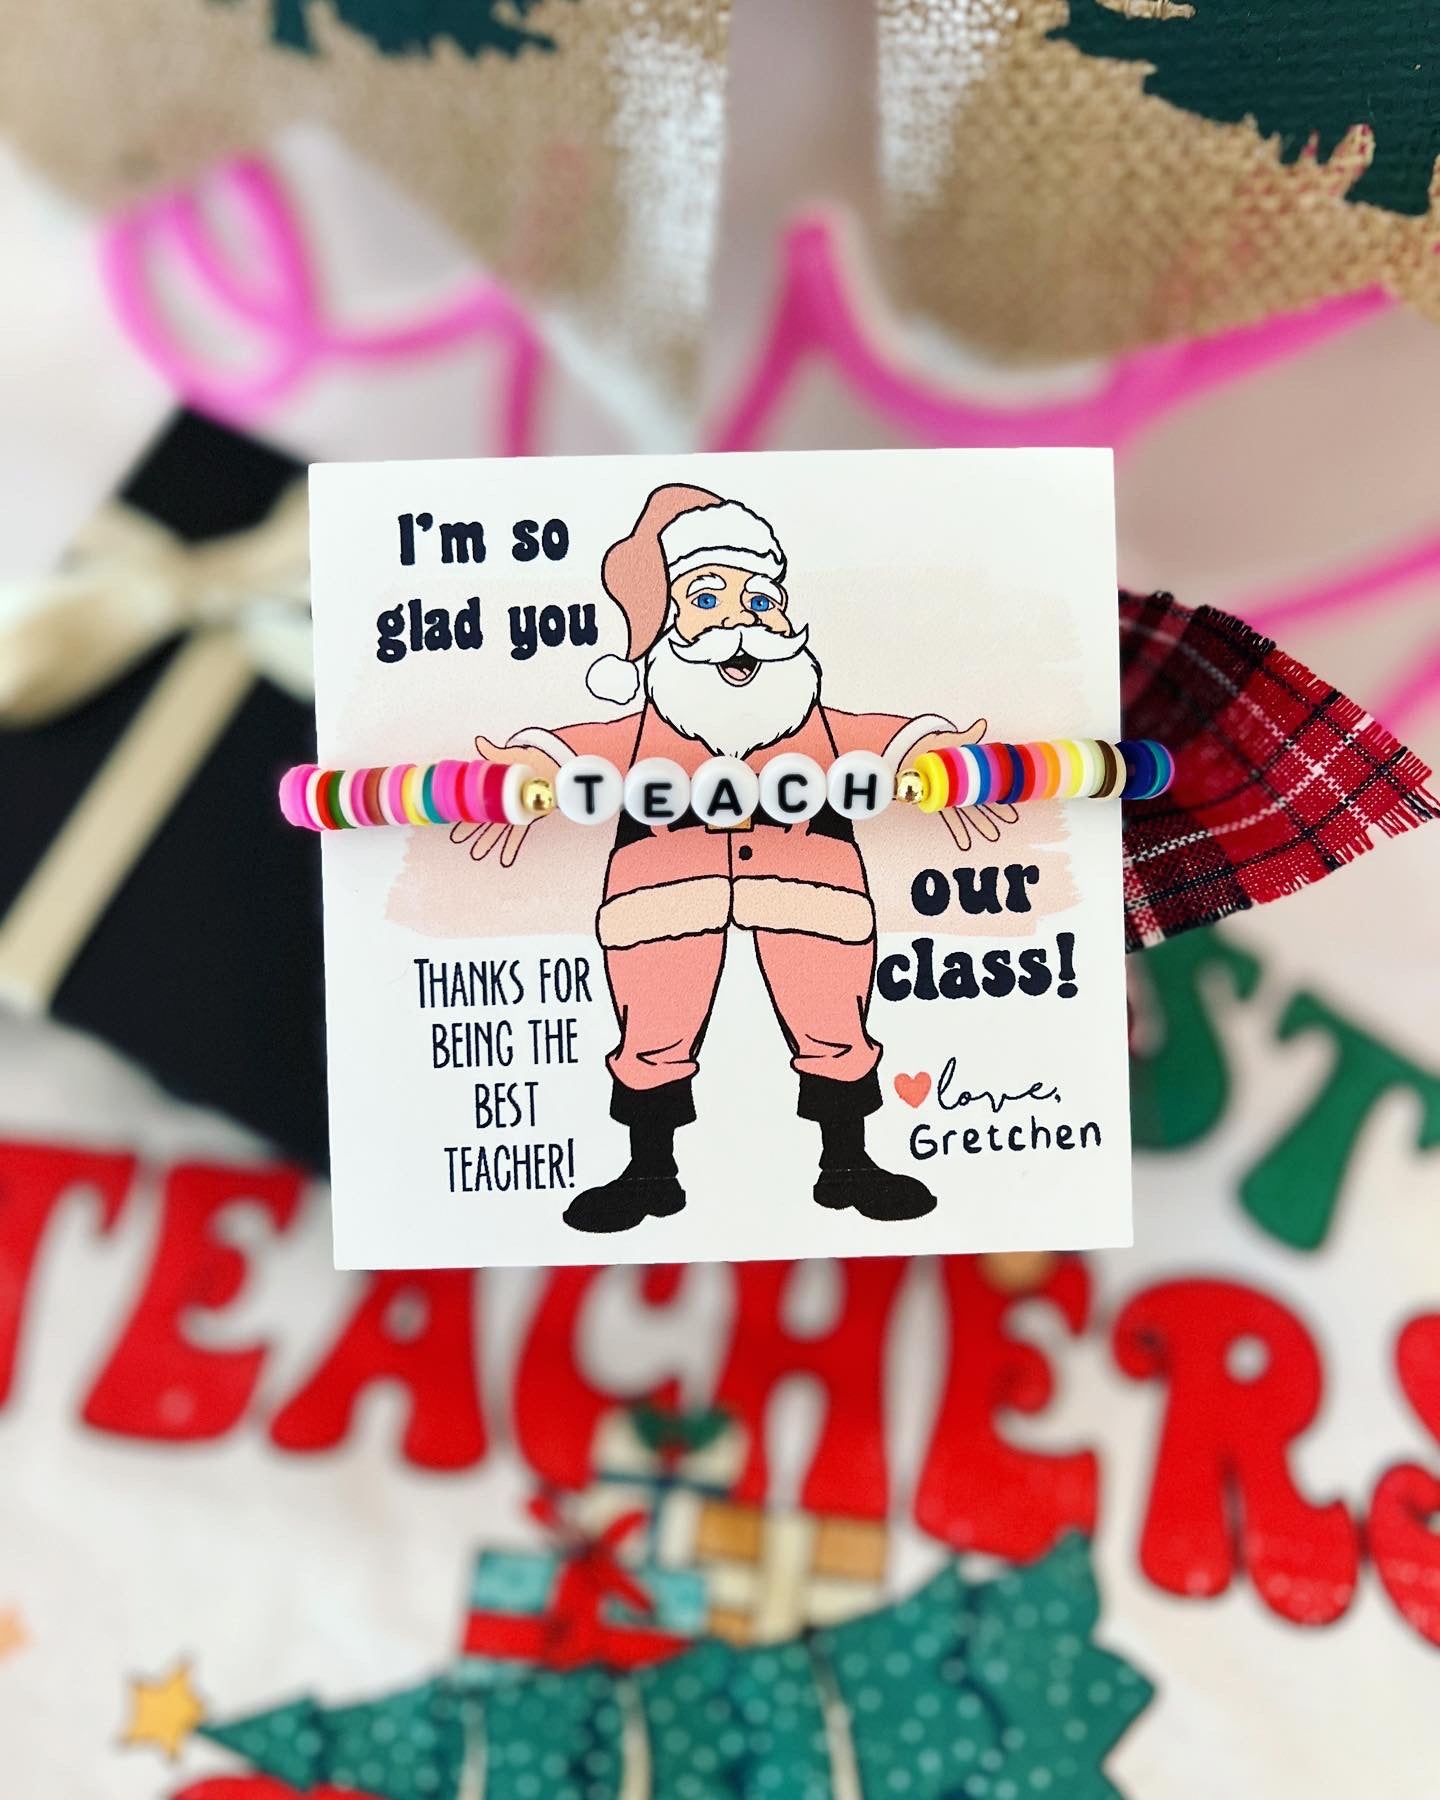 Teacher Holiday Gift! Teach Bracelet! Personalized Holiday gift, included with box and ribbon! Teacher Christmas gift! Holiday gift!